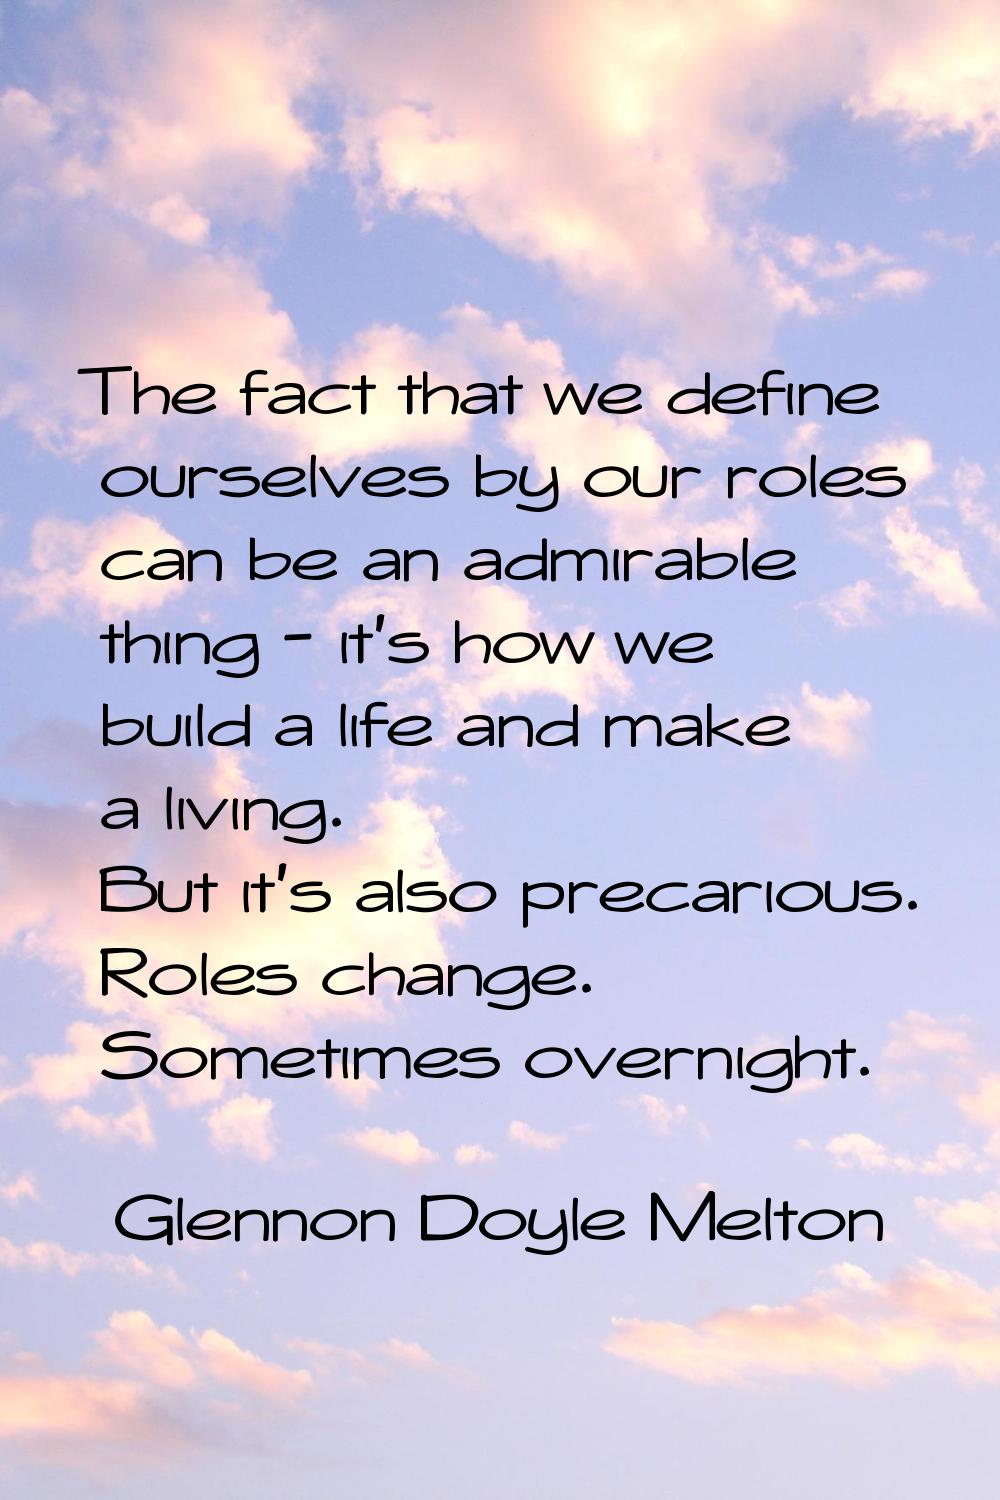 The fact that we define ourselves by our roles can be an admirable thing - it's how we build a life